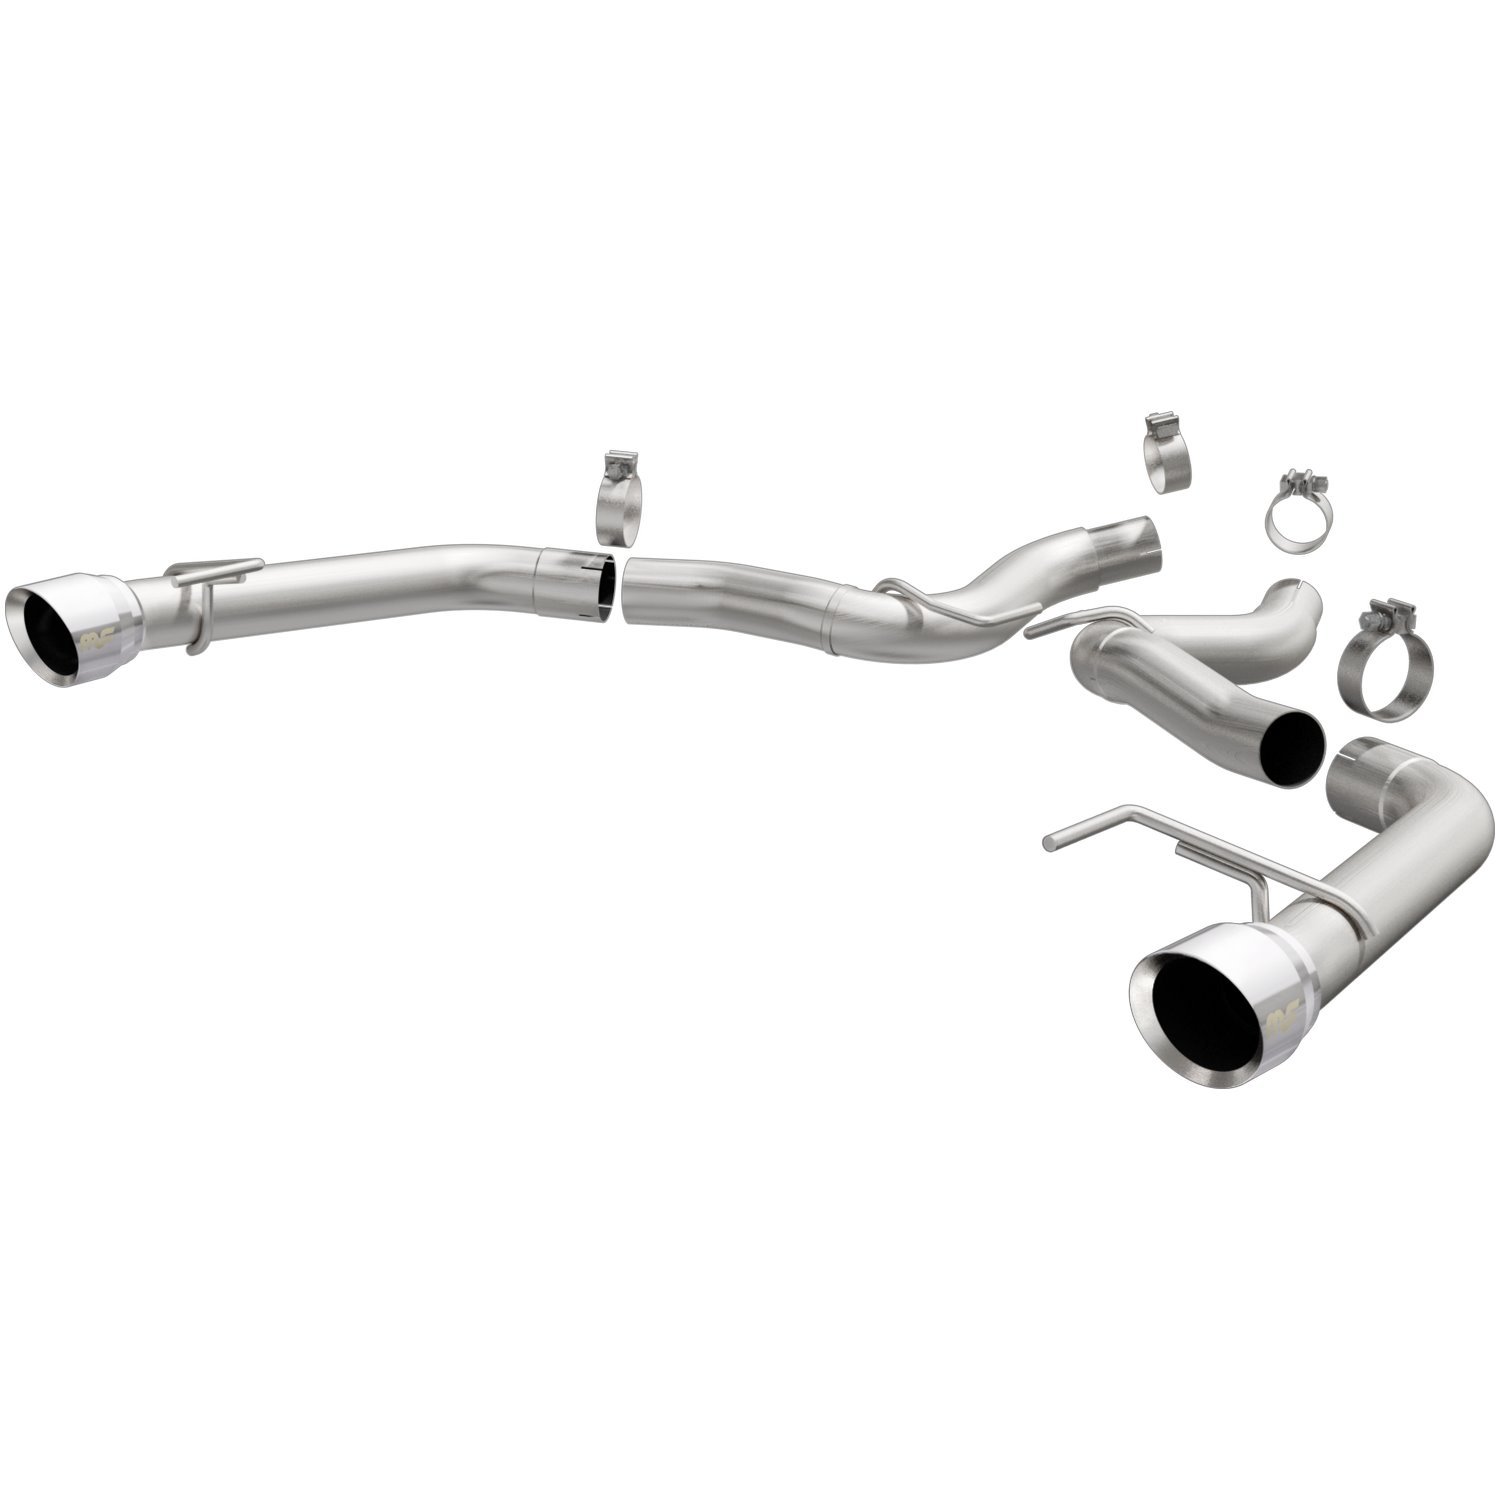 2015-2017 Ford Mustang Race Series Axle-Back Performance Exhaust System